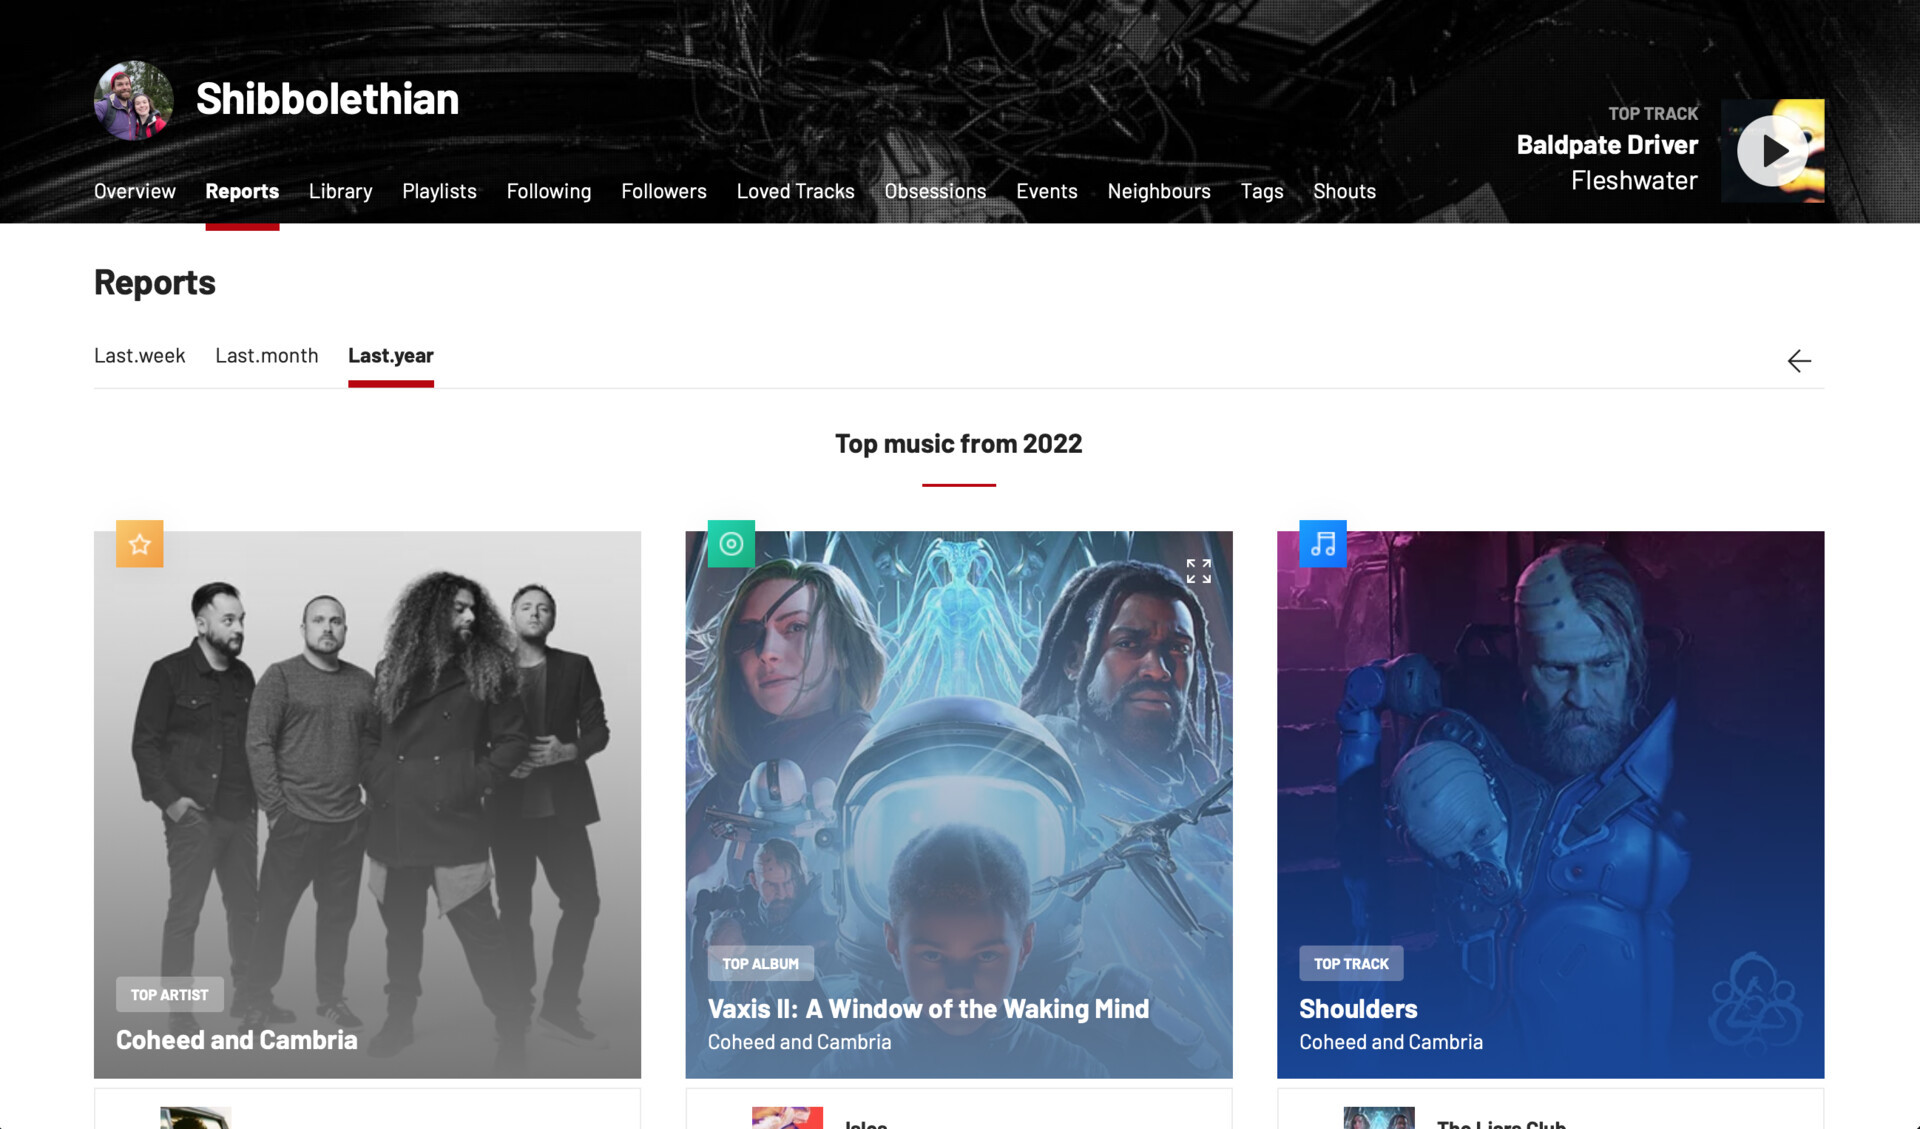 A screenshot of my Last.fm year in music, with Coheed and Cambria prominent across all categories.